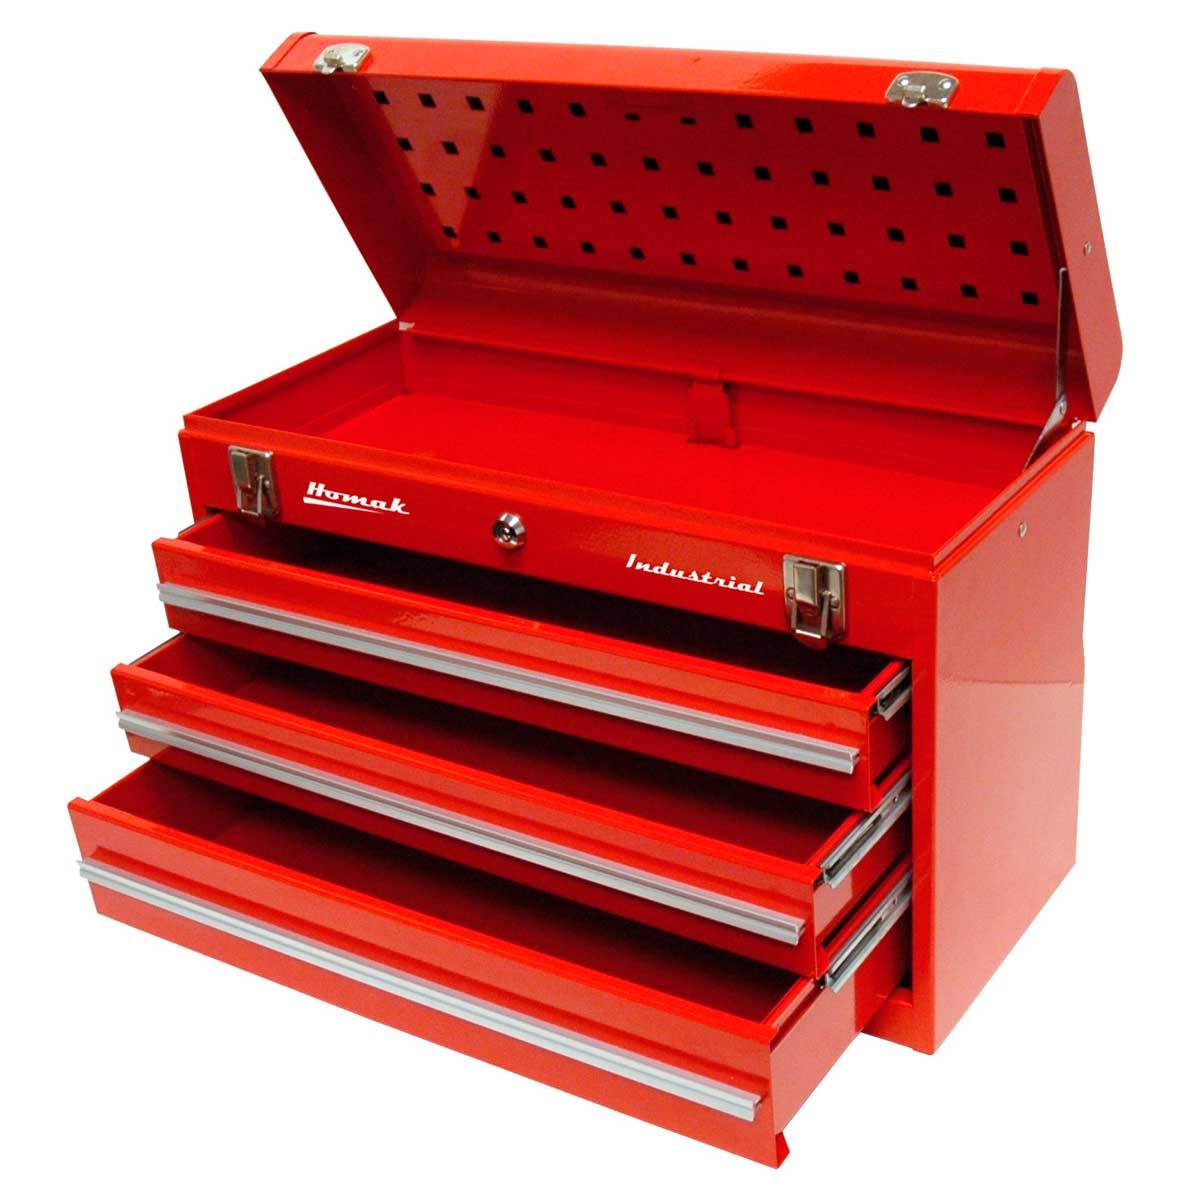 Homak 20" Industrial 3-Drawer Friction Toolbox - Red